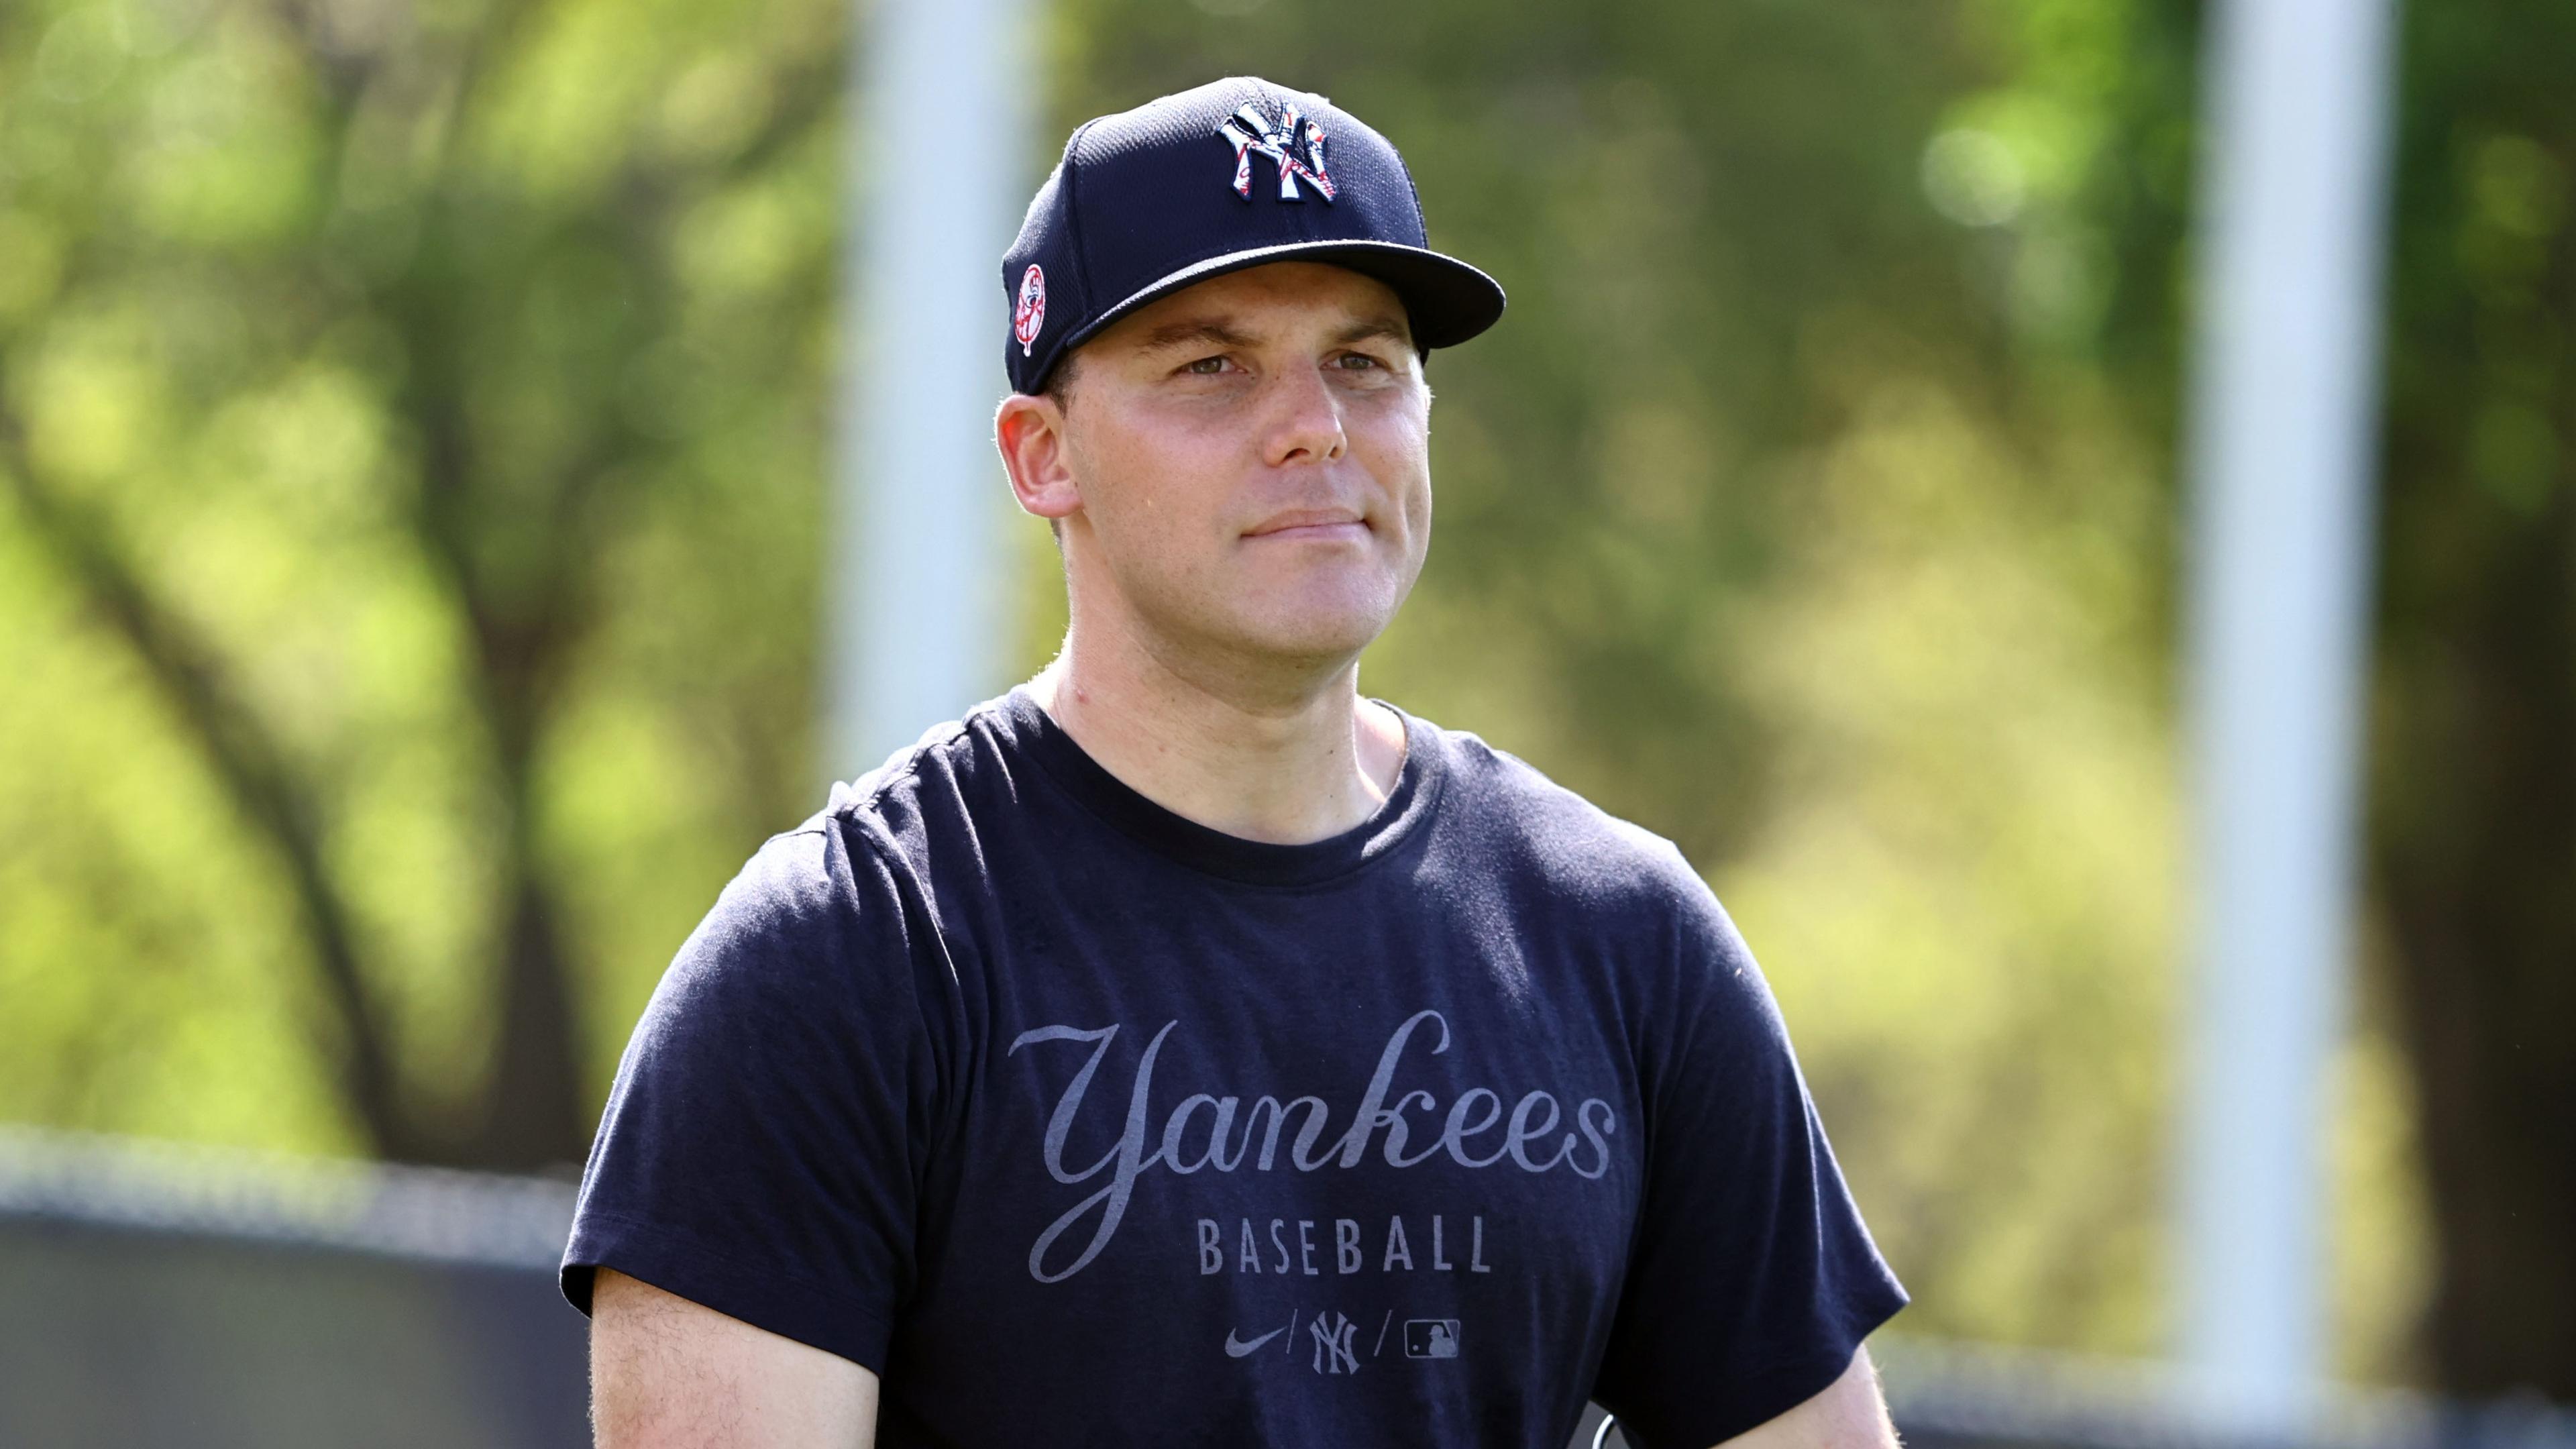 Mar 15, 2022; Tampa, FL, USA; New York Yankees catcher Ben Rortvedt (38) looks on during spring training workouts at George M. Steinbrenner Field. Mandatory Credit: Kim Klement-USA TODAY Sports / © Kim Klement-USA TODAY Sports